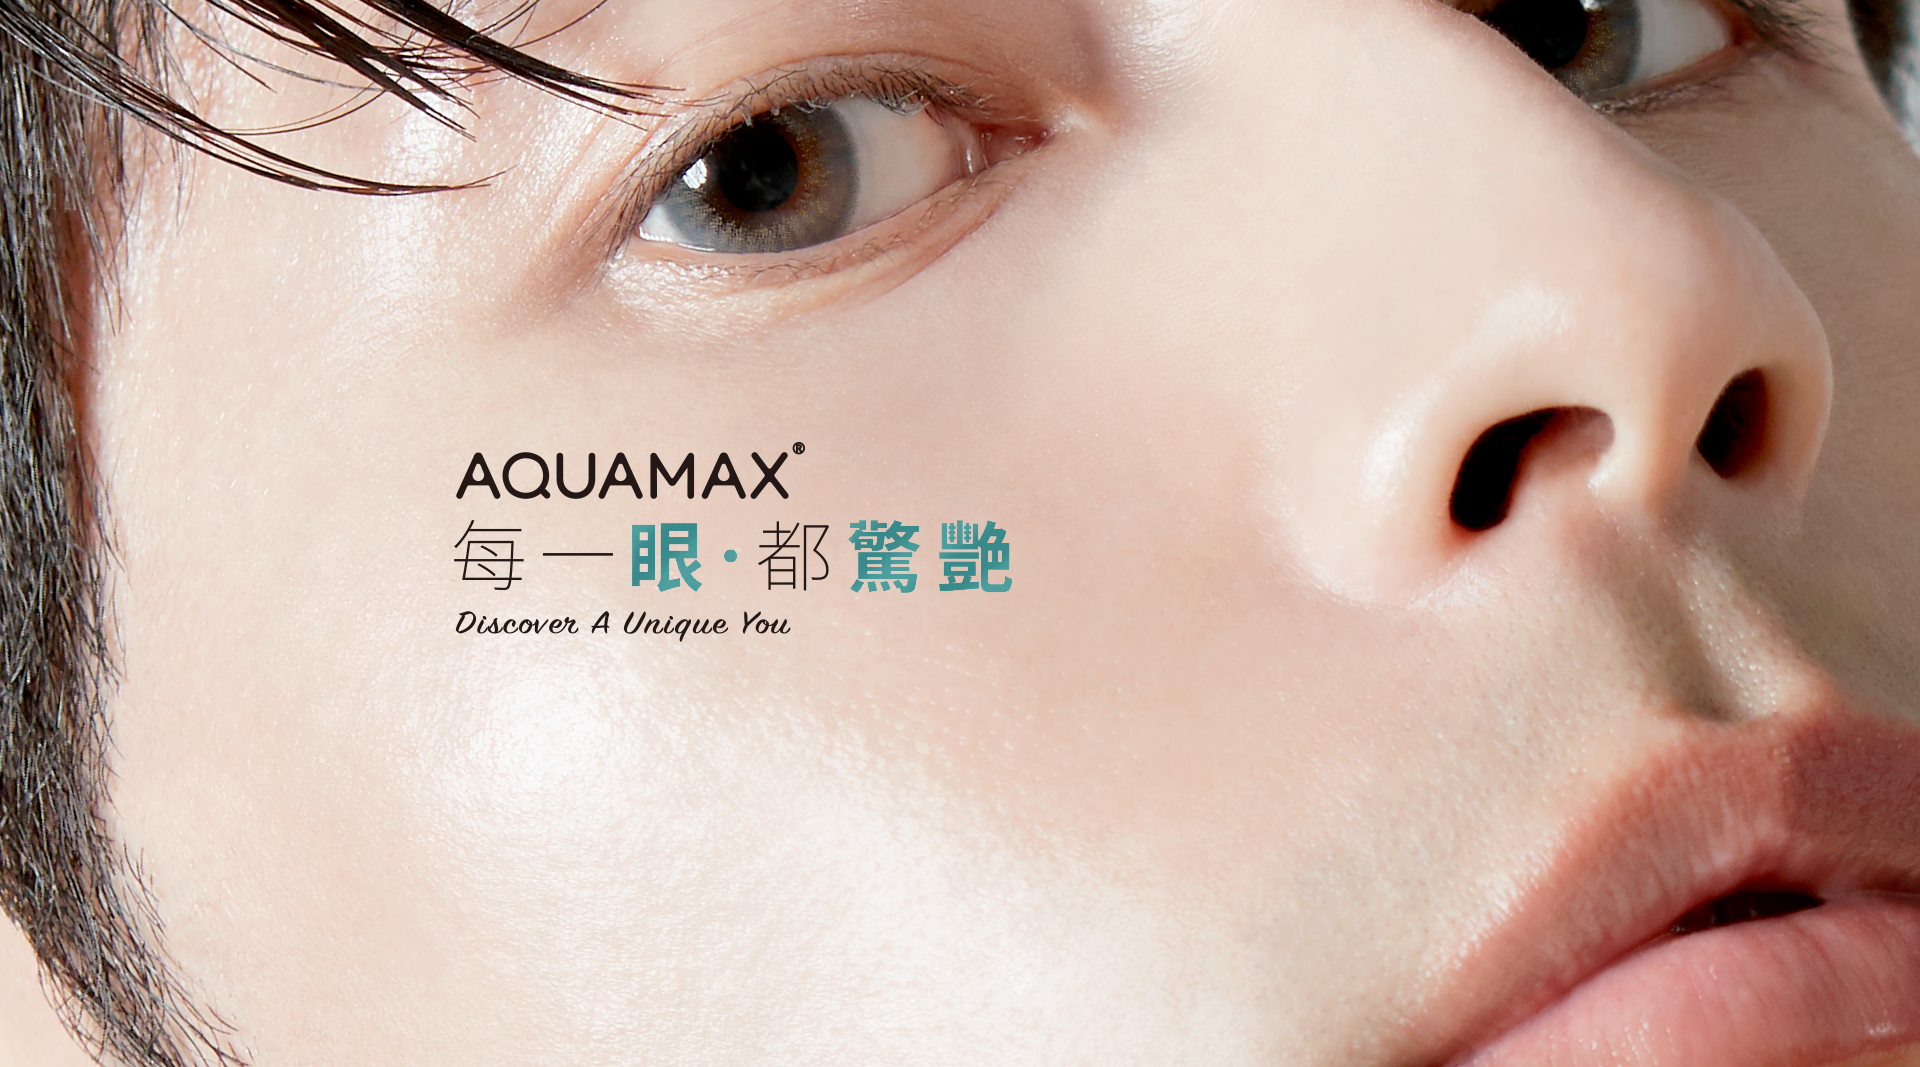 AQUAMAX, Natural series, Contact lenses, beauty lenses, color lenses, Cadet Grey, Antique Brass, Apricot Champagne, Burnt Ruby, Ease Olive, Maple Russet